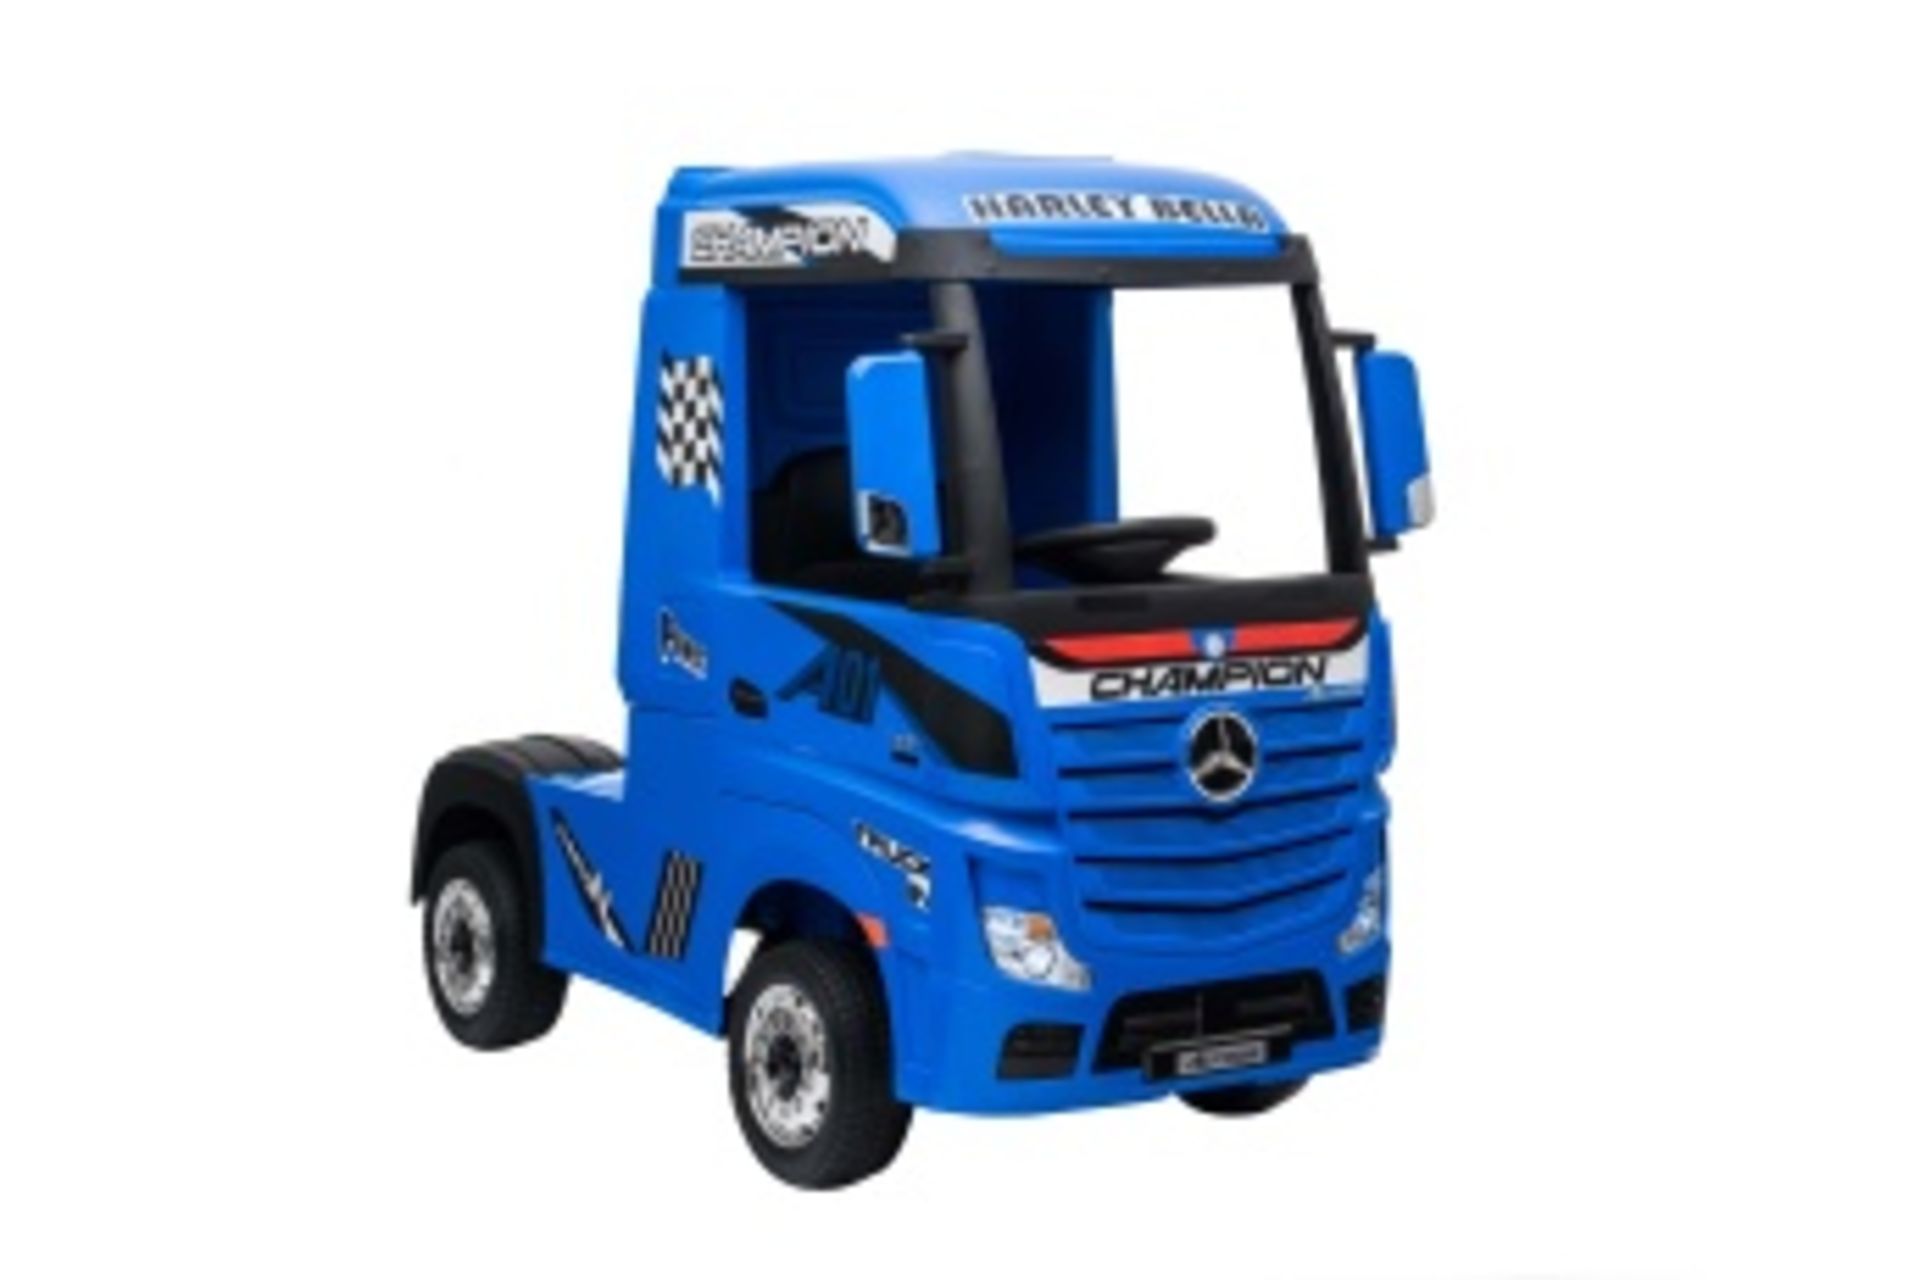 Ride On Fully Licenced Mercedes Benz Actros Truck 24v complete with Official Trailer - Blue